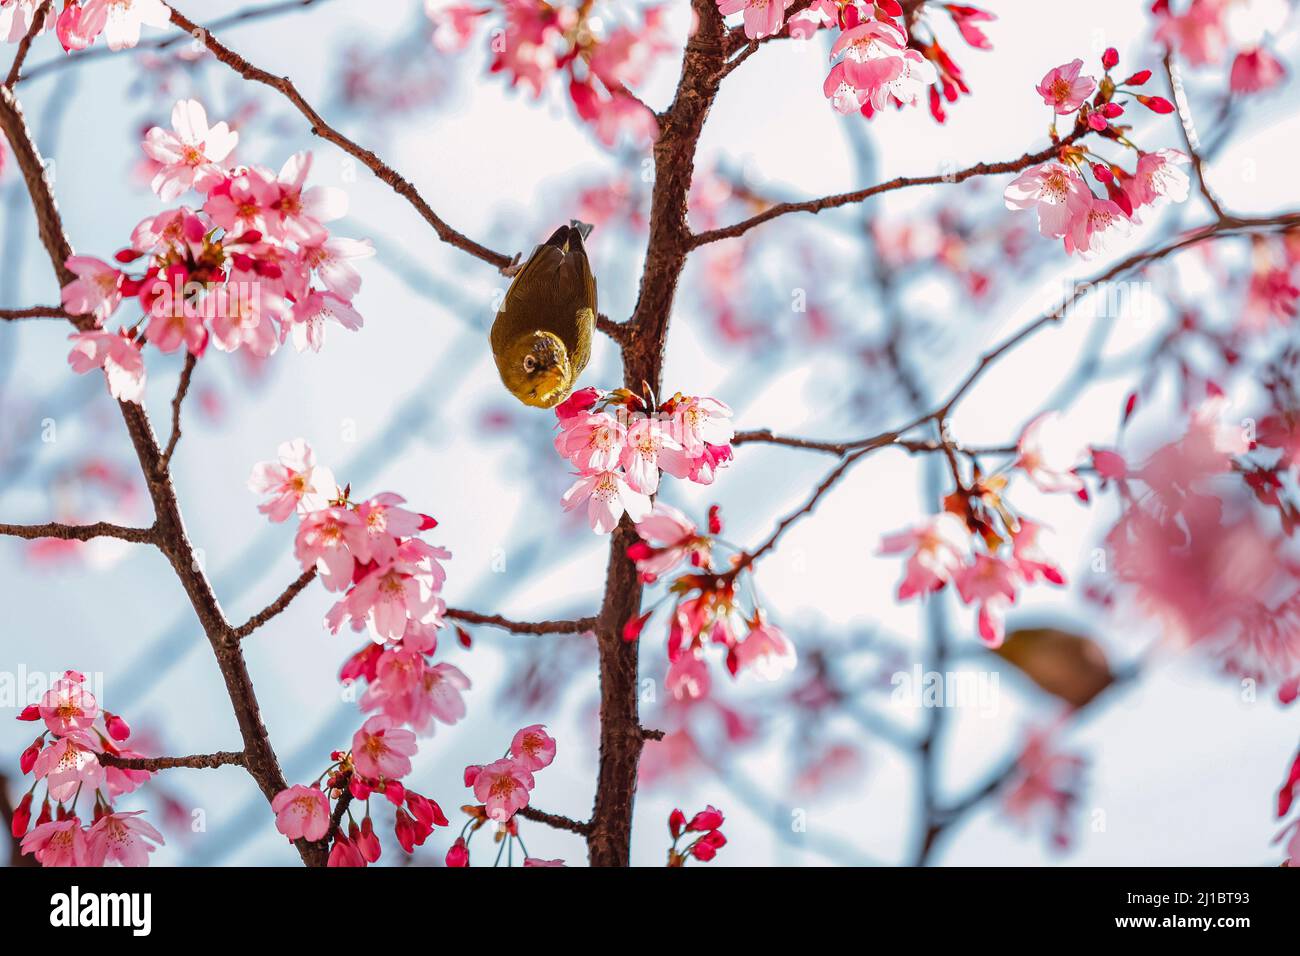 The Japanese White-eye bird is seen between cherry blossoms flowers in Tokyo, Japan. Stock Photo